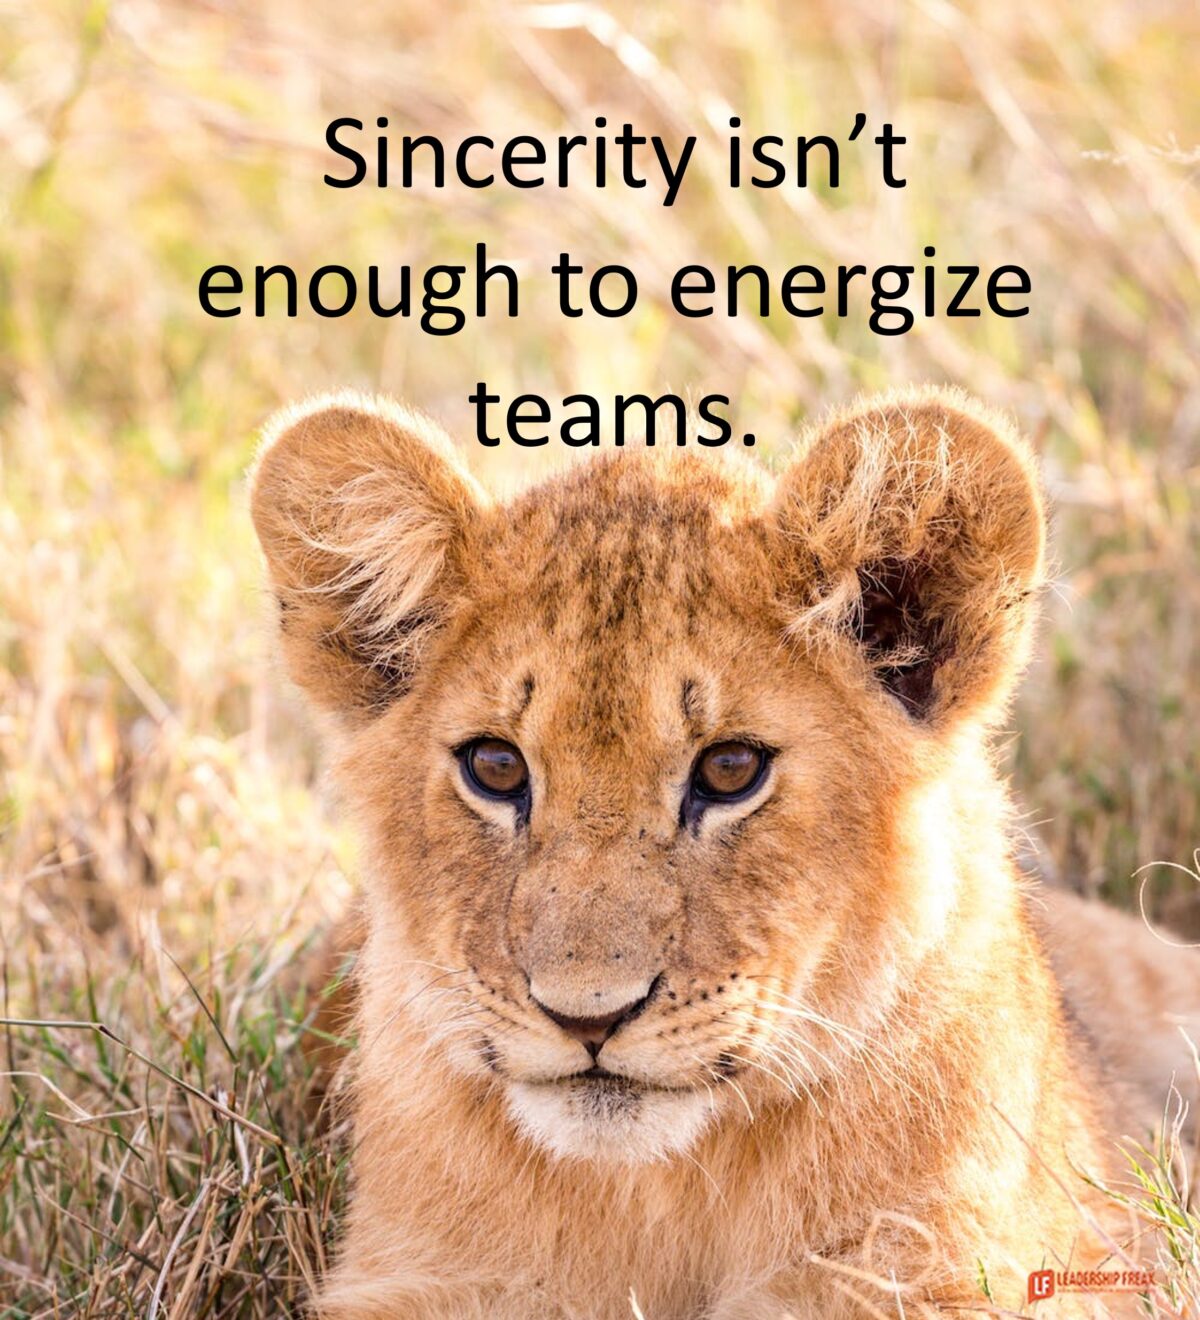 Do This to Energize Teams